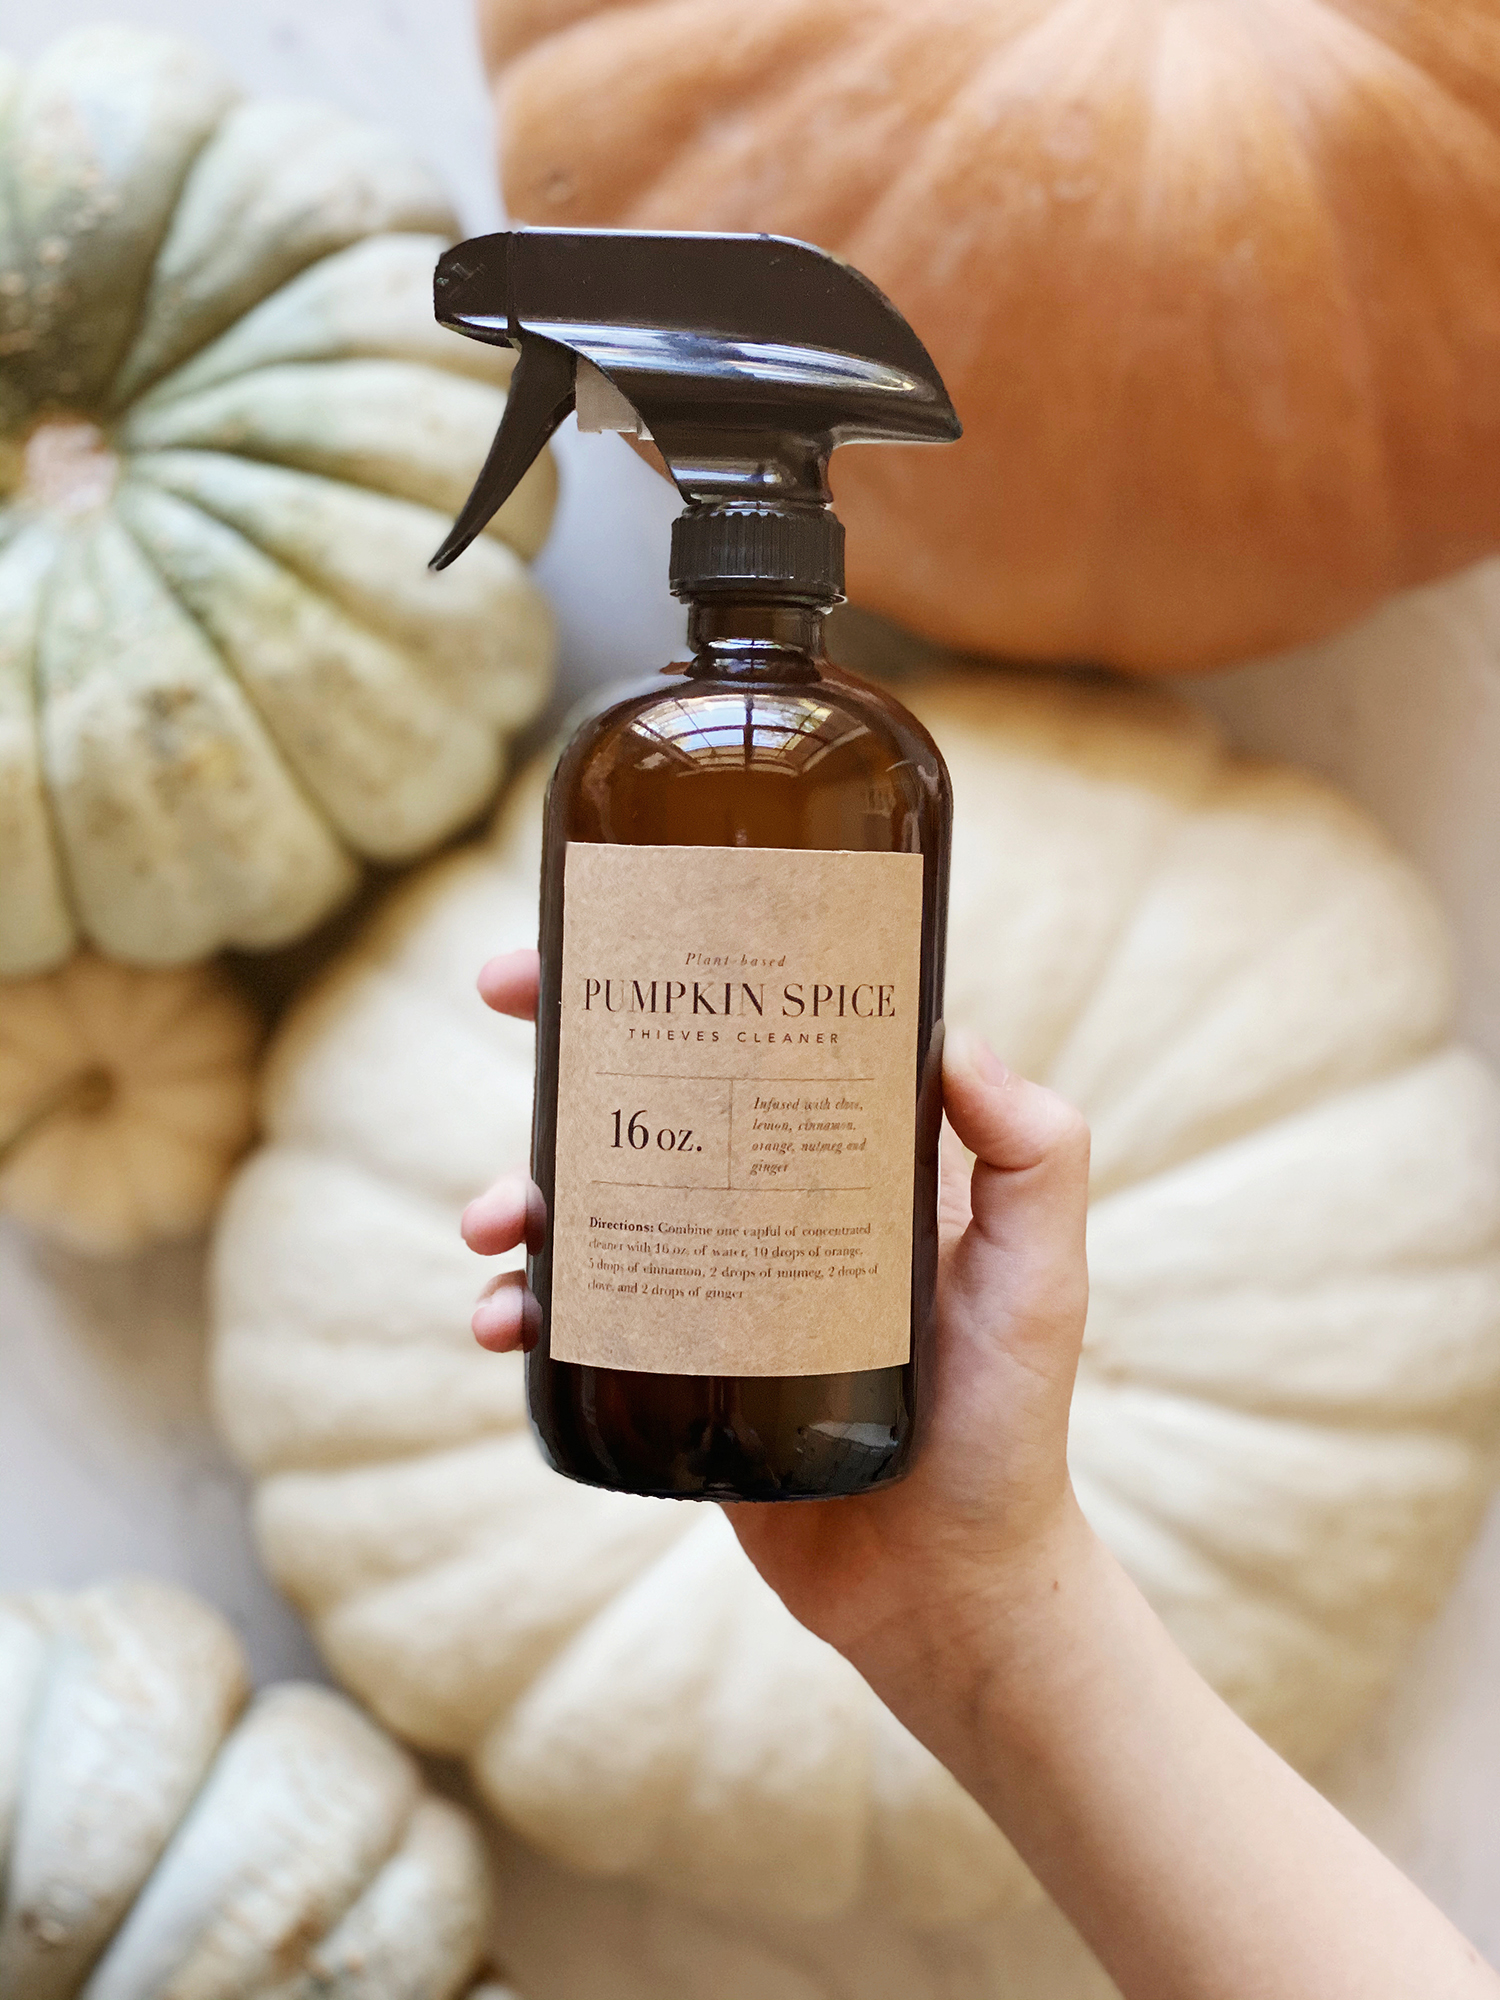 How to make pumpkin spice Thieves household cleaner. We love this cleaner and the changes it has brought to our home. And when September hits, I love transforming it into a pumpkin spice scented wonder. Catch the recipe and how-to over on KaraLayne.com! #ThievesCLeaner #YoungLiving #NonToxicCleaner #NonToxicHouseholdCleaner #PlantBasedCleaner #CleanLiving #NonToxicHome #DitchingAndSwitching #EssentialOils